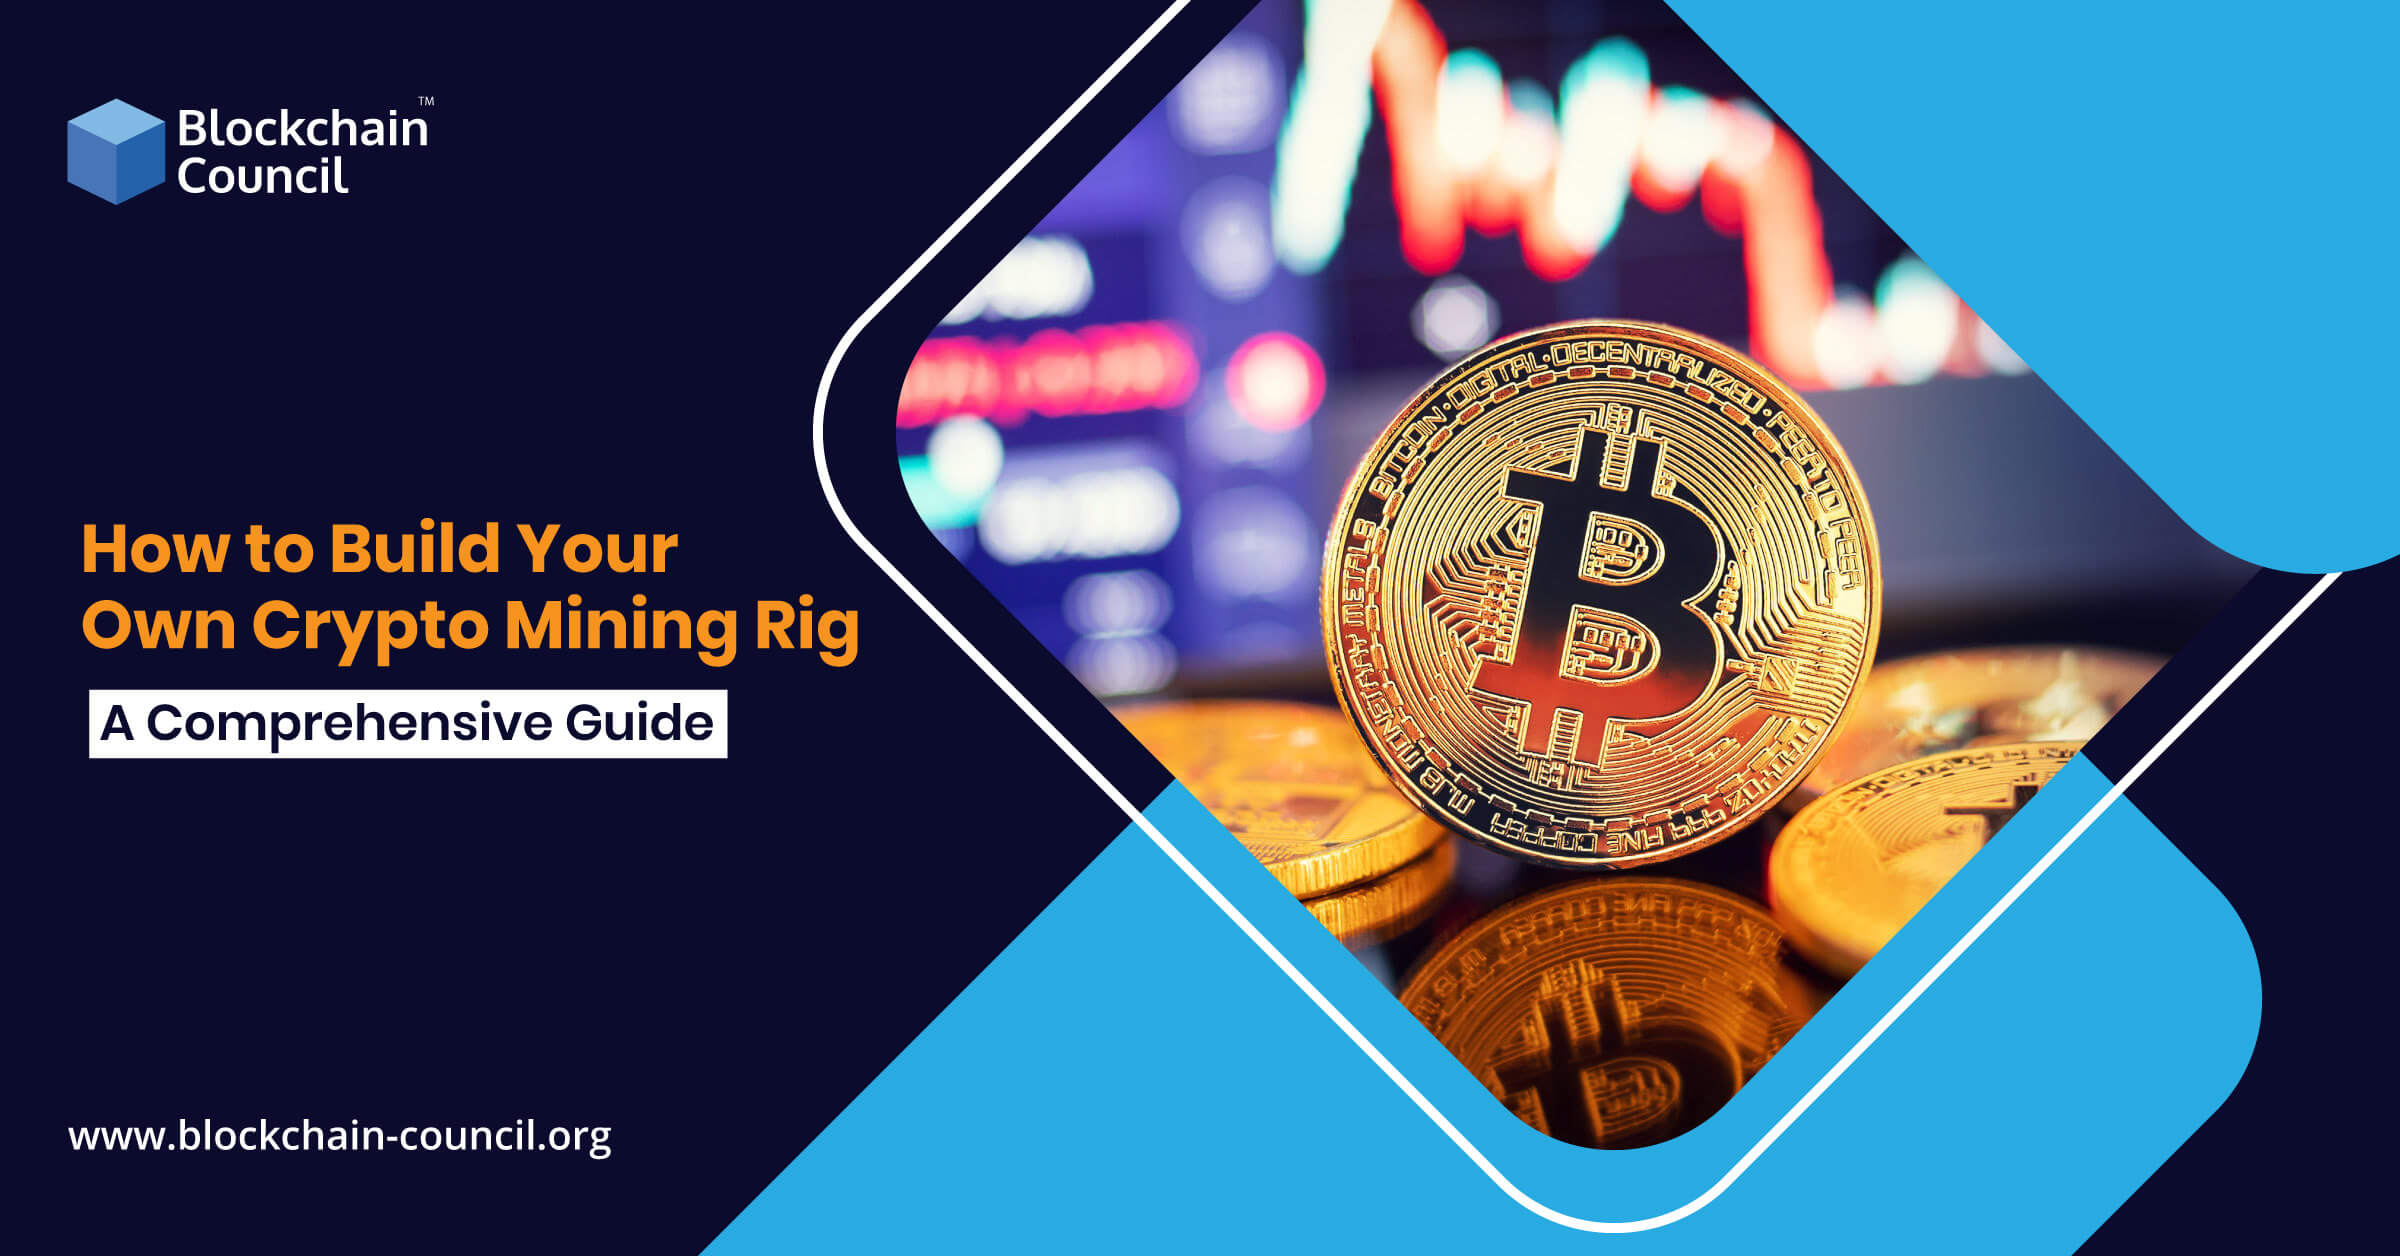 How to Build Your Own Crypto Mining Rig: A Comprehensive Guide